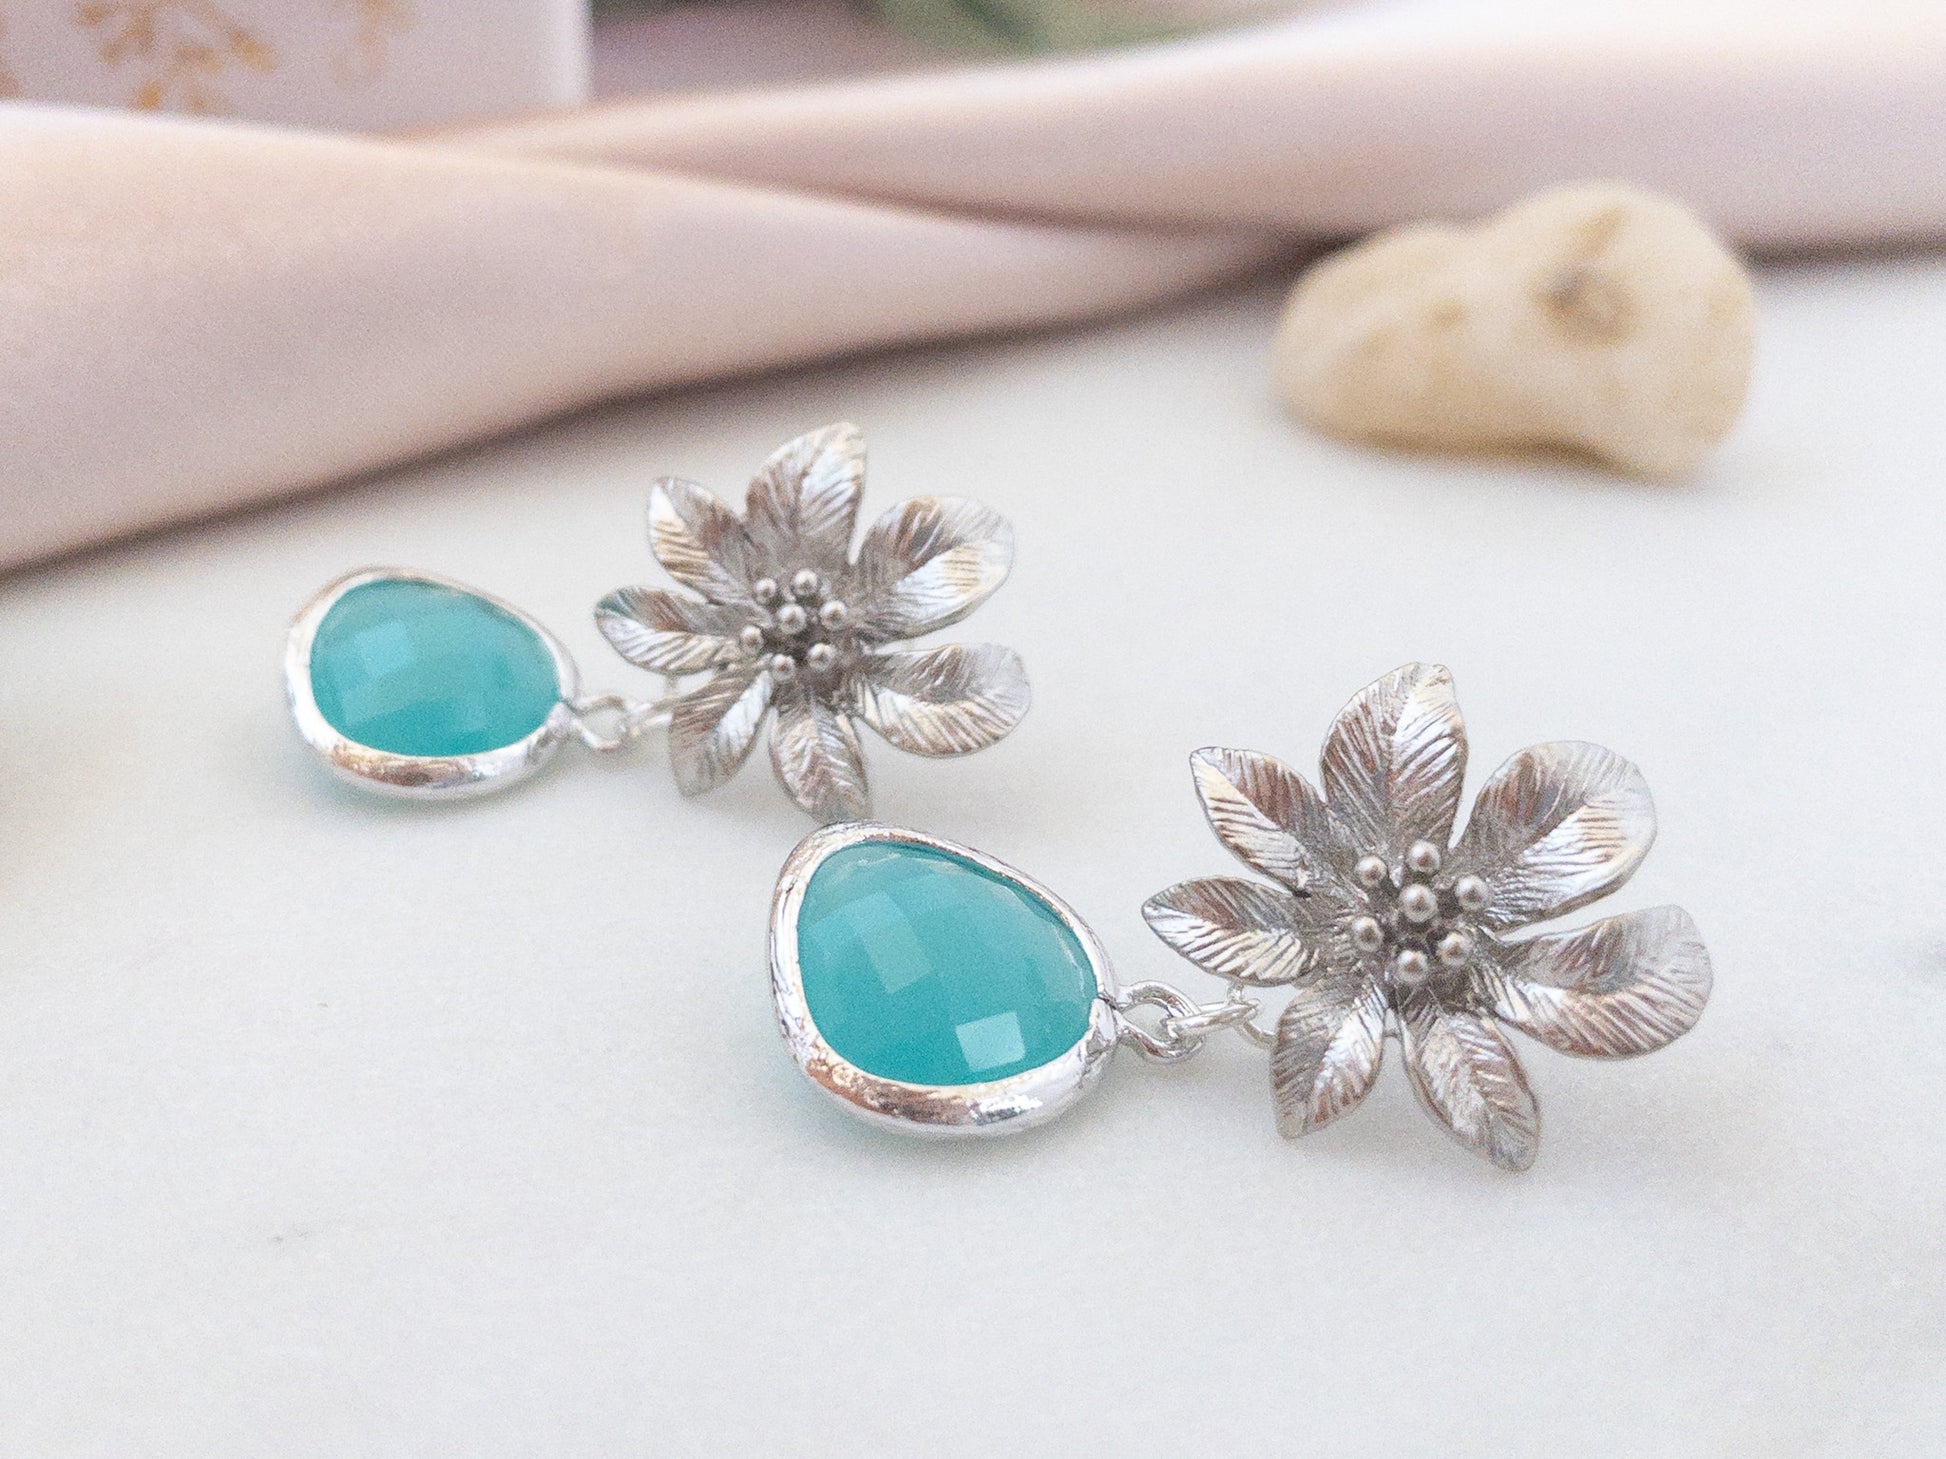 silver Clematis flower earrings with blue stones laying flat on a white surface